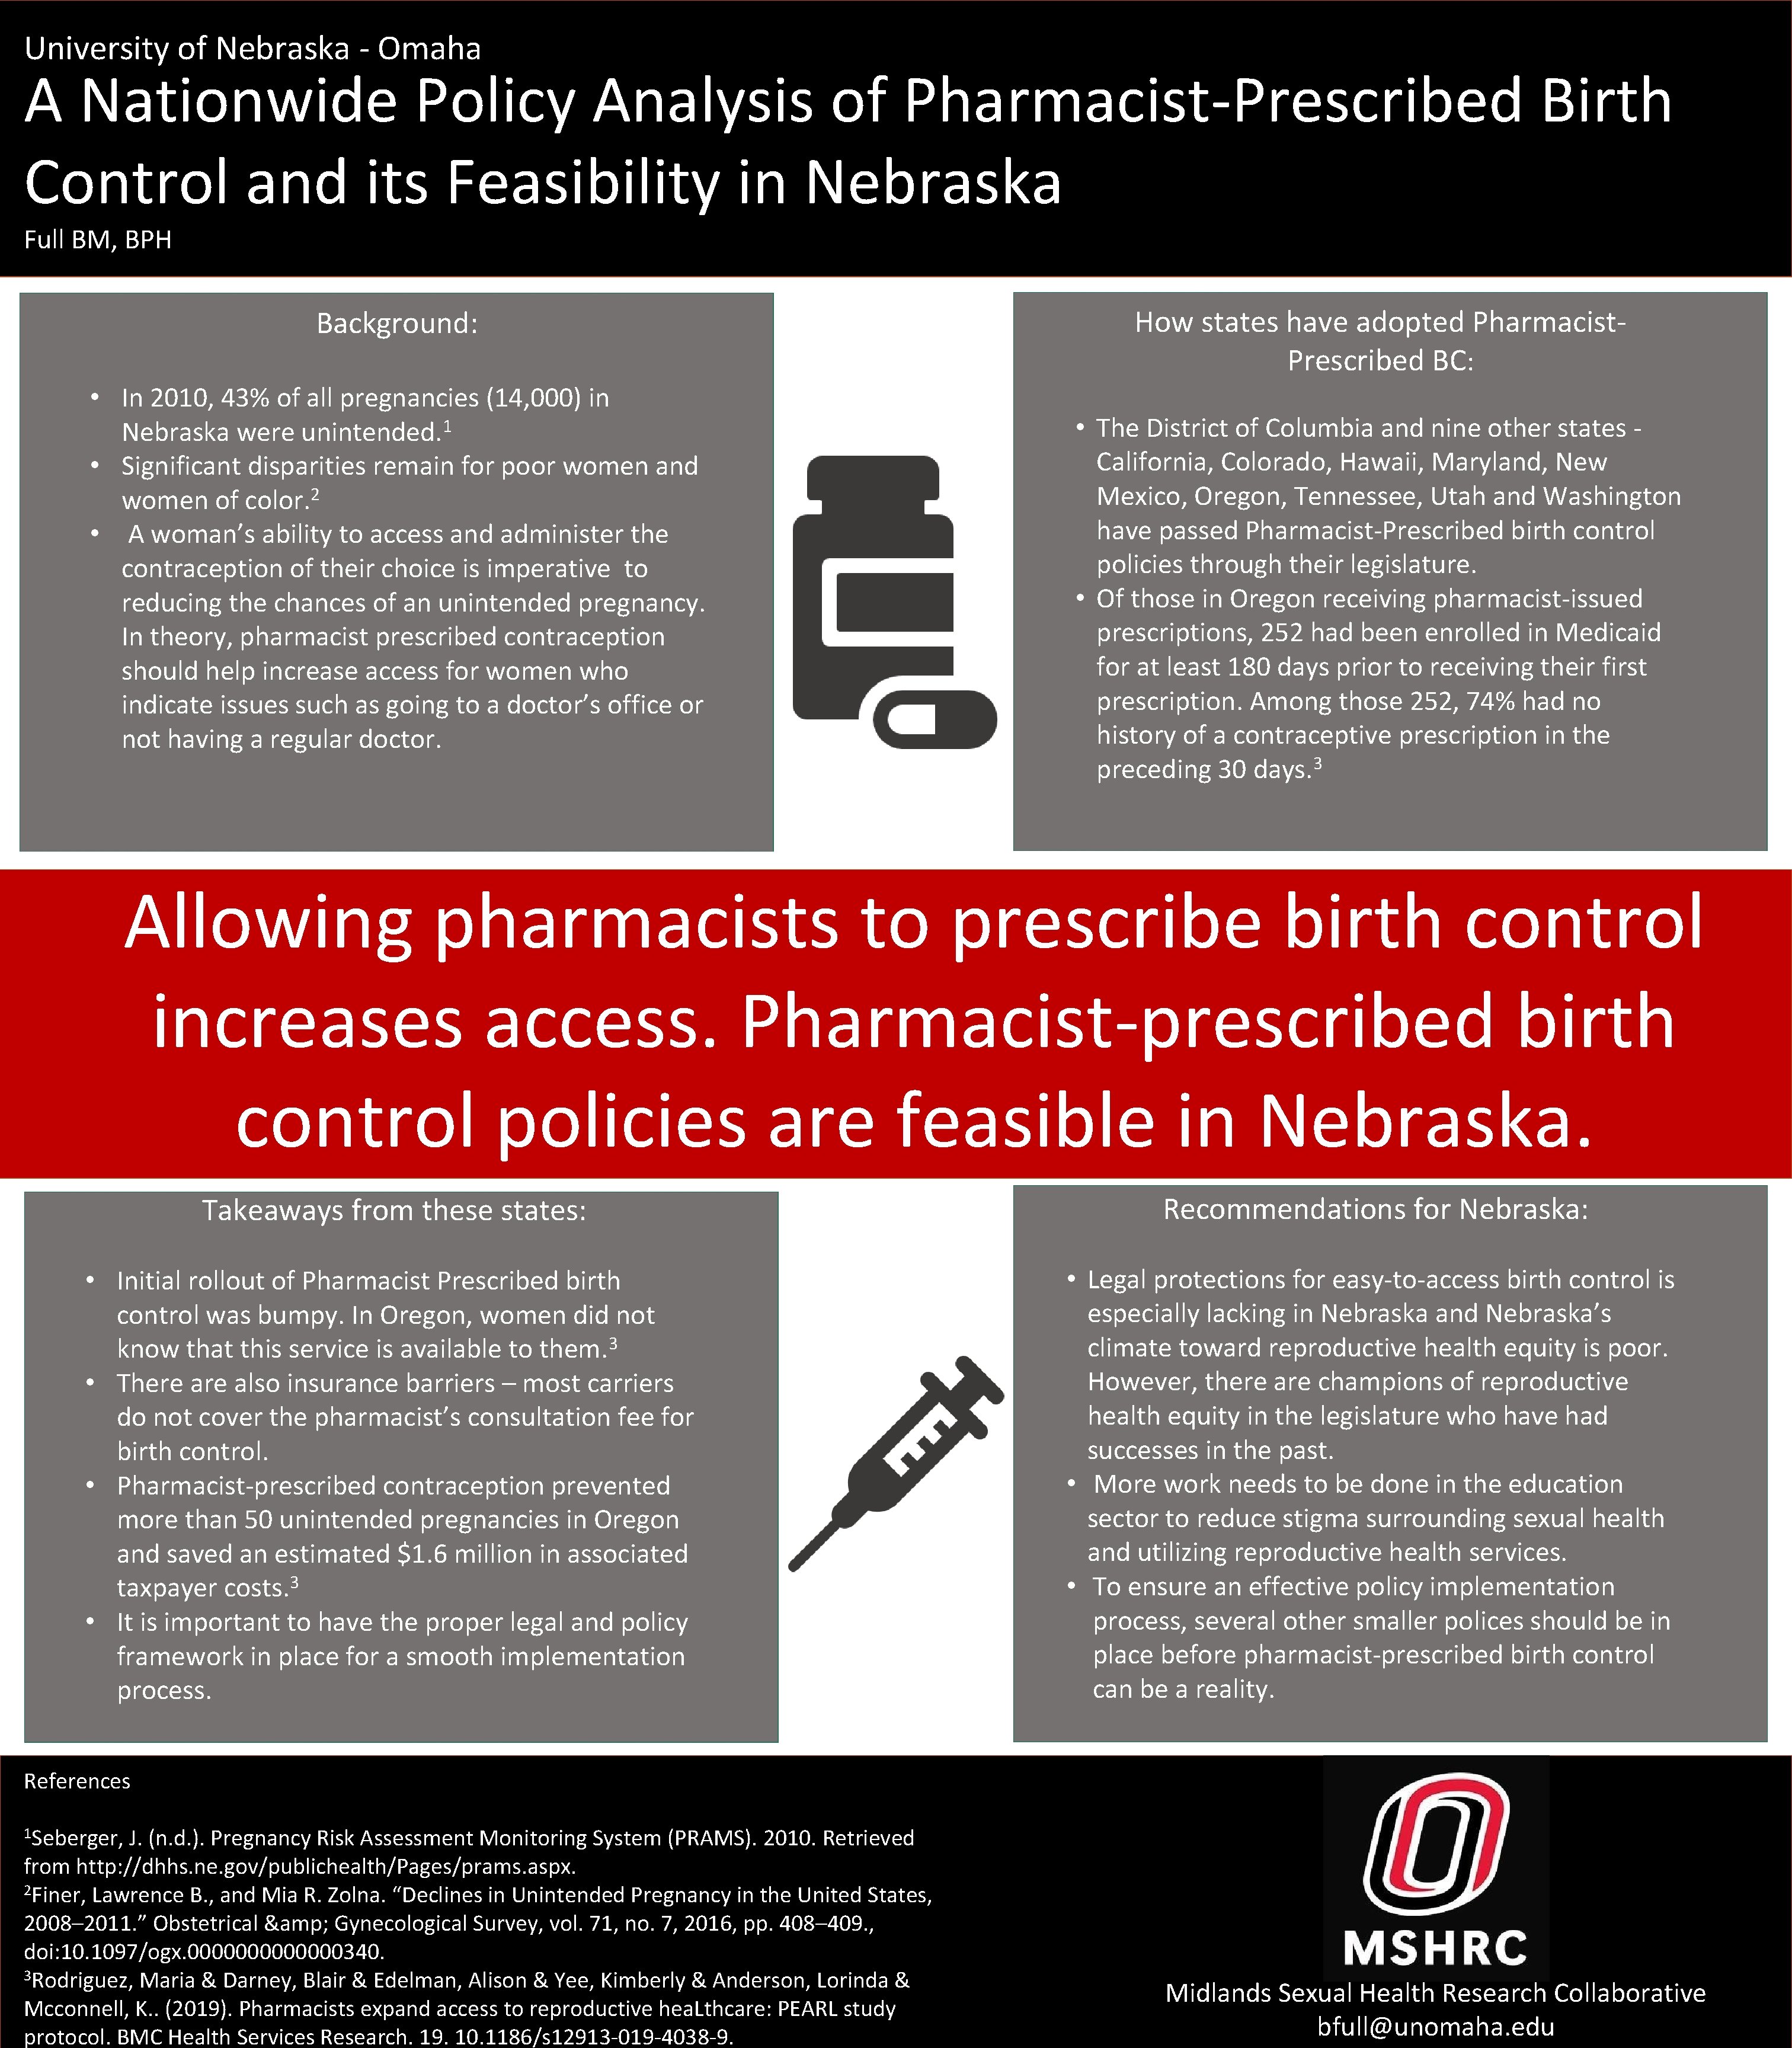 University of Nebraska - Omaha A Nationwide Policy Analysis of Pharmacist-Prescribed Birth Control and